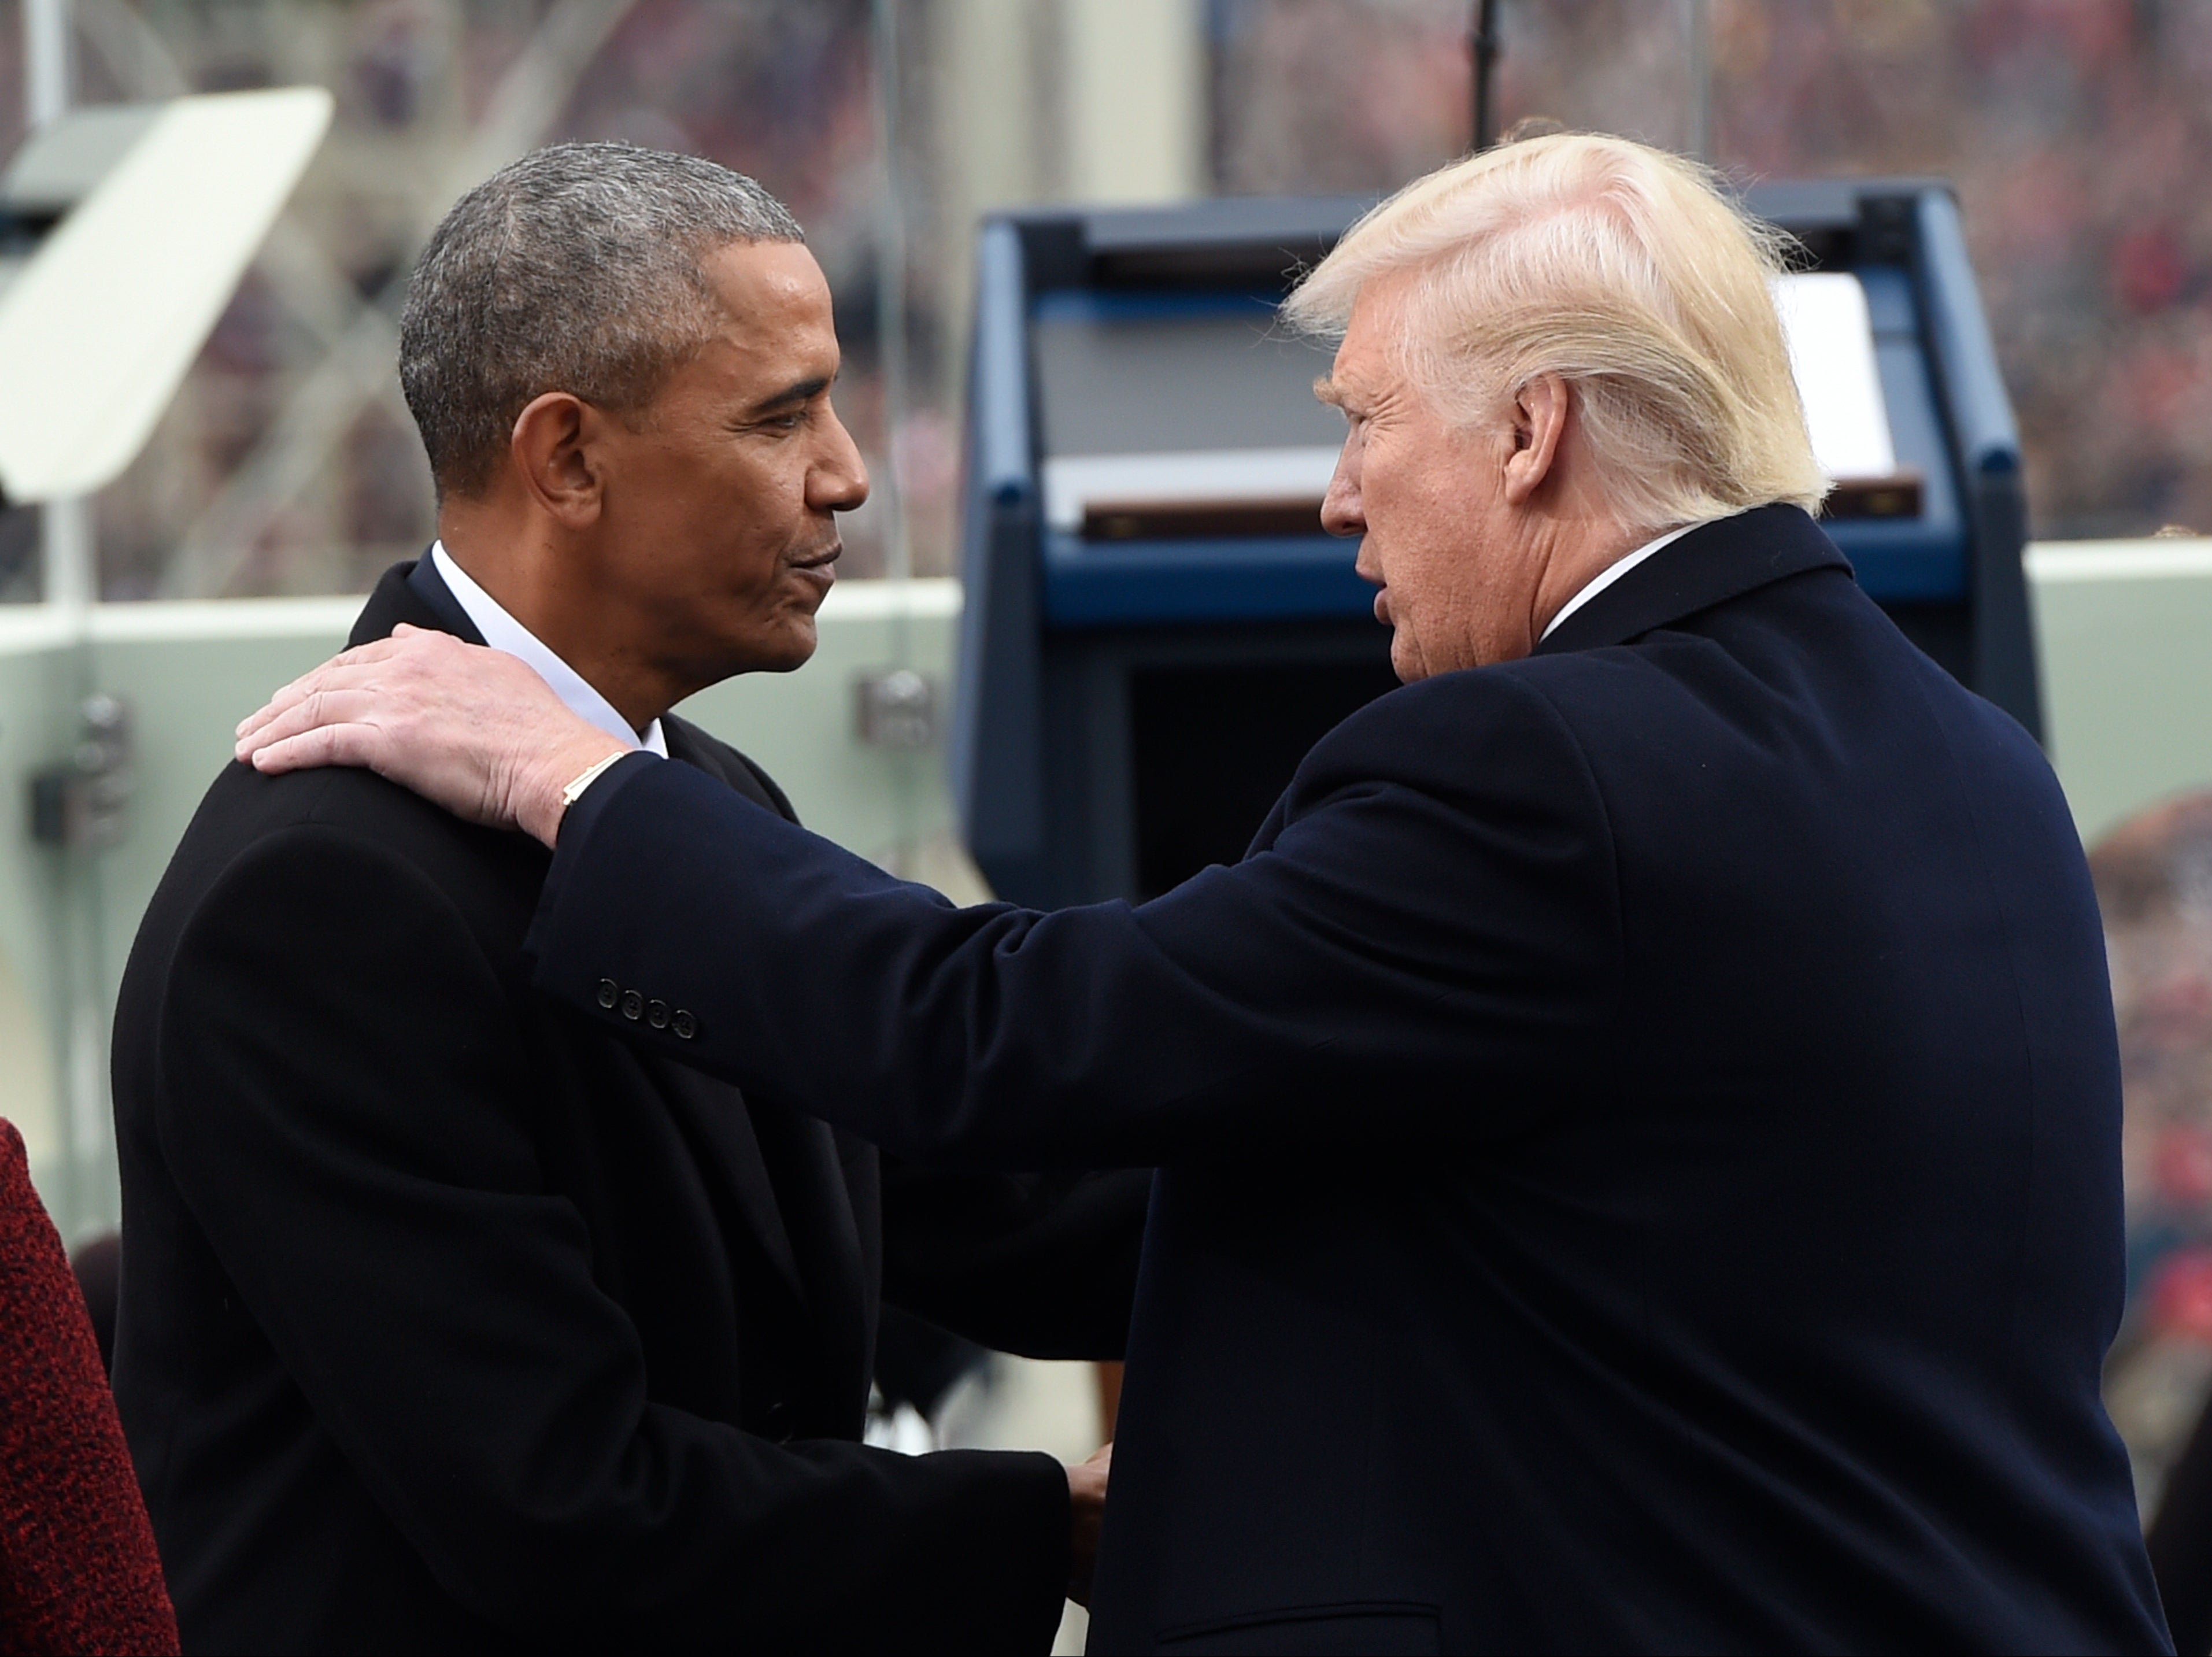 Former US president Barack Obama shakes hands with Donald Trump during the inauguration at the US Capitol on January 20, 2017